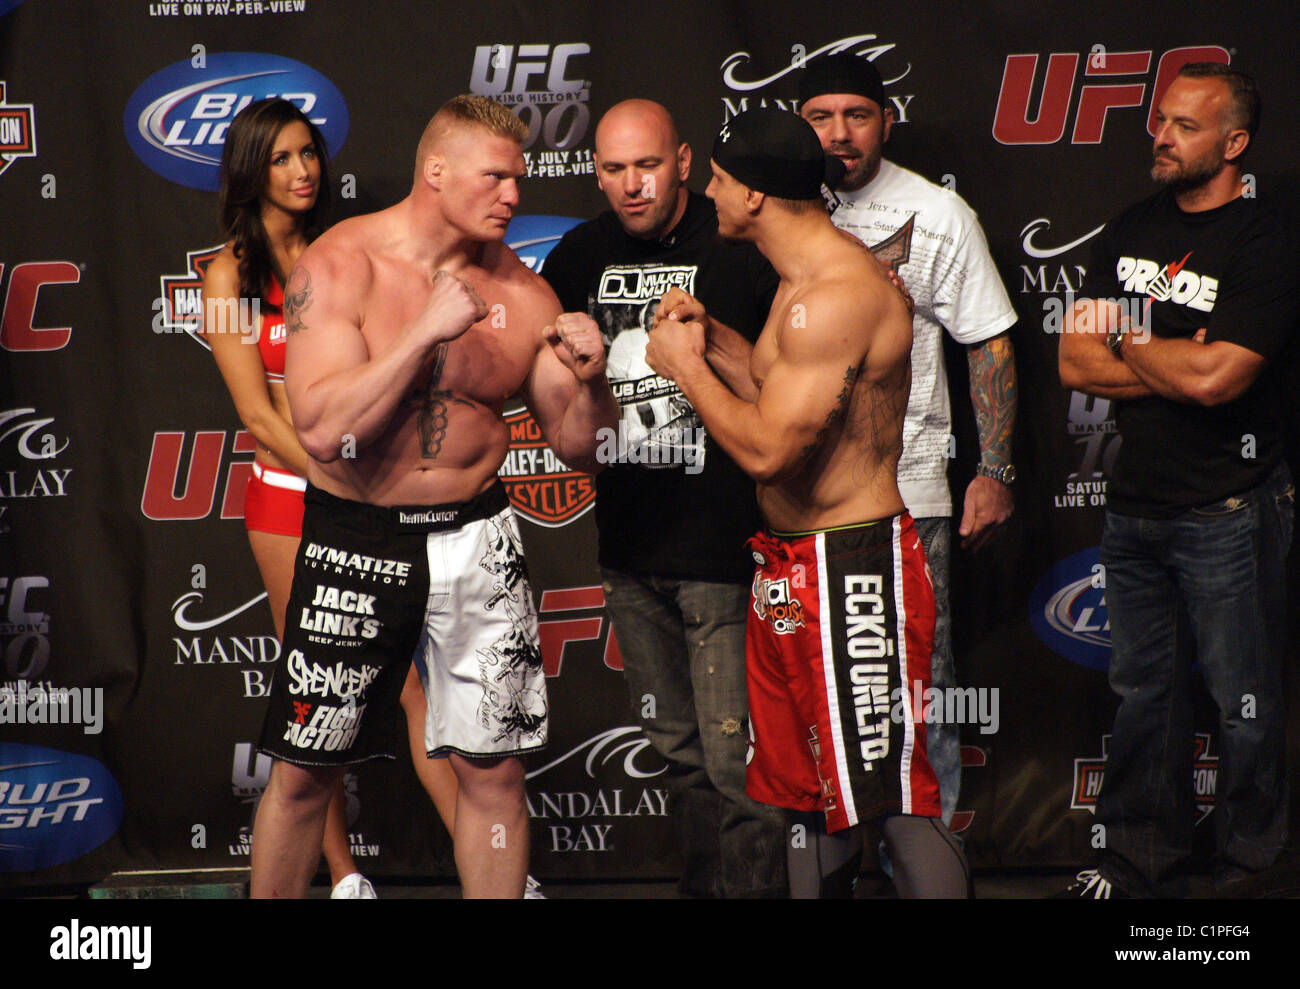 Brock Lesnar and Frank Mir The UFC 100 weigh-in held at Mandalay Bay Hotel  and Casino Las Vegas, Nevada - 10.07.09 Stock Photo - Alamy